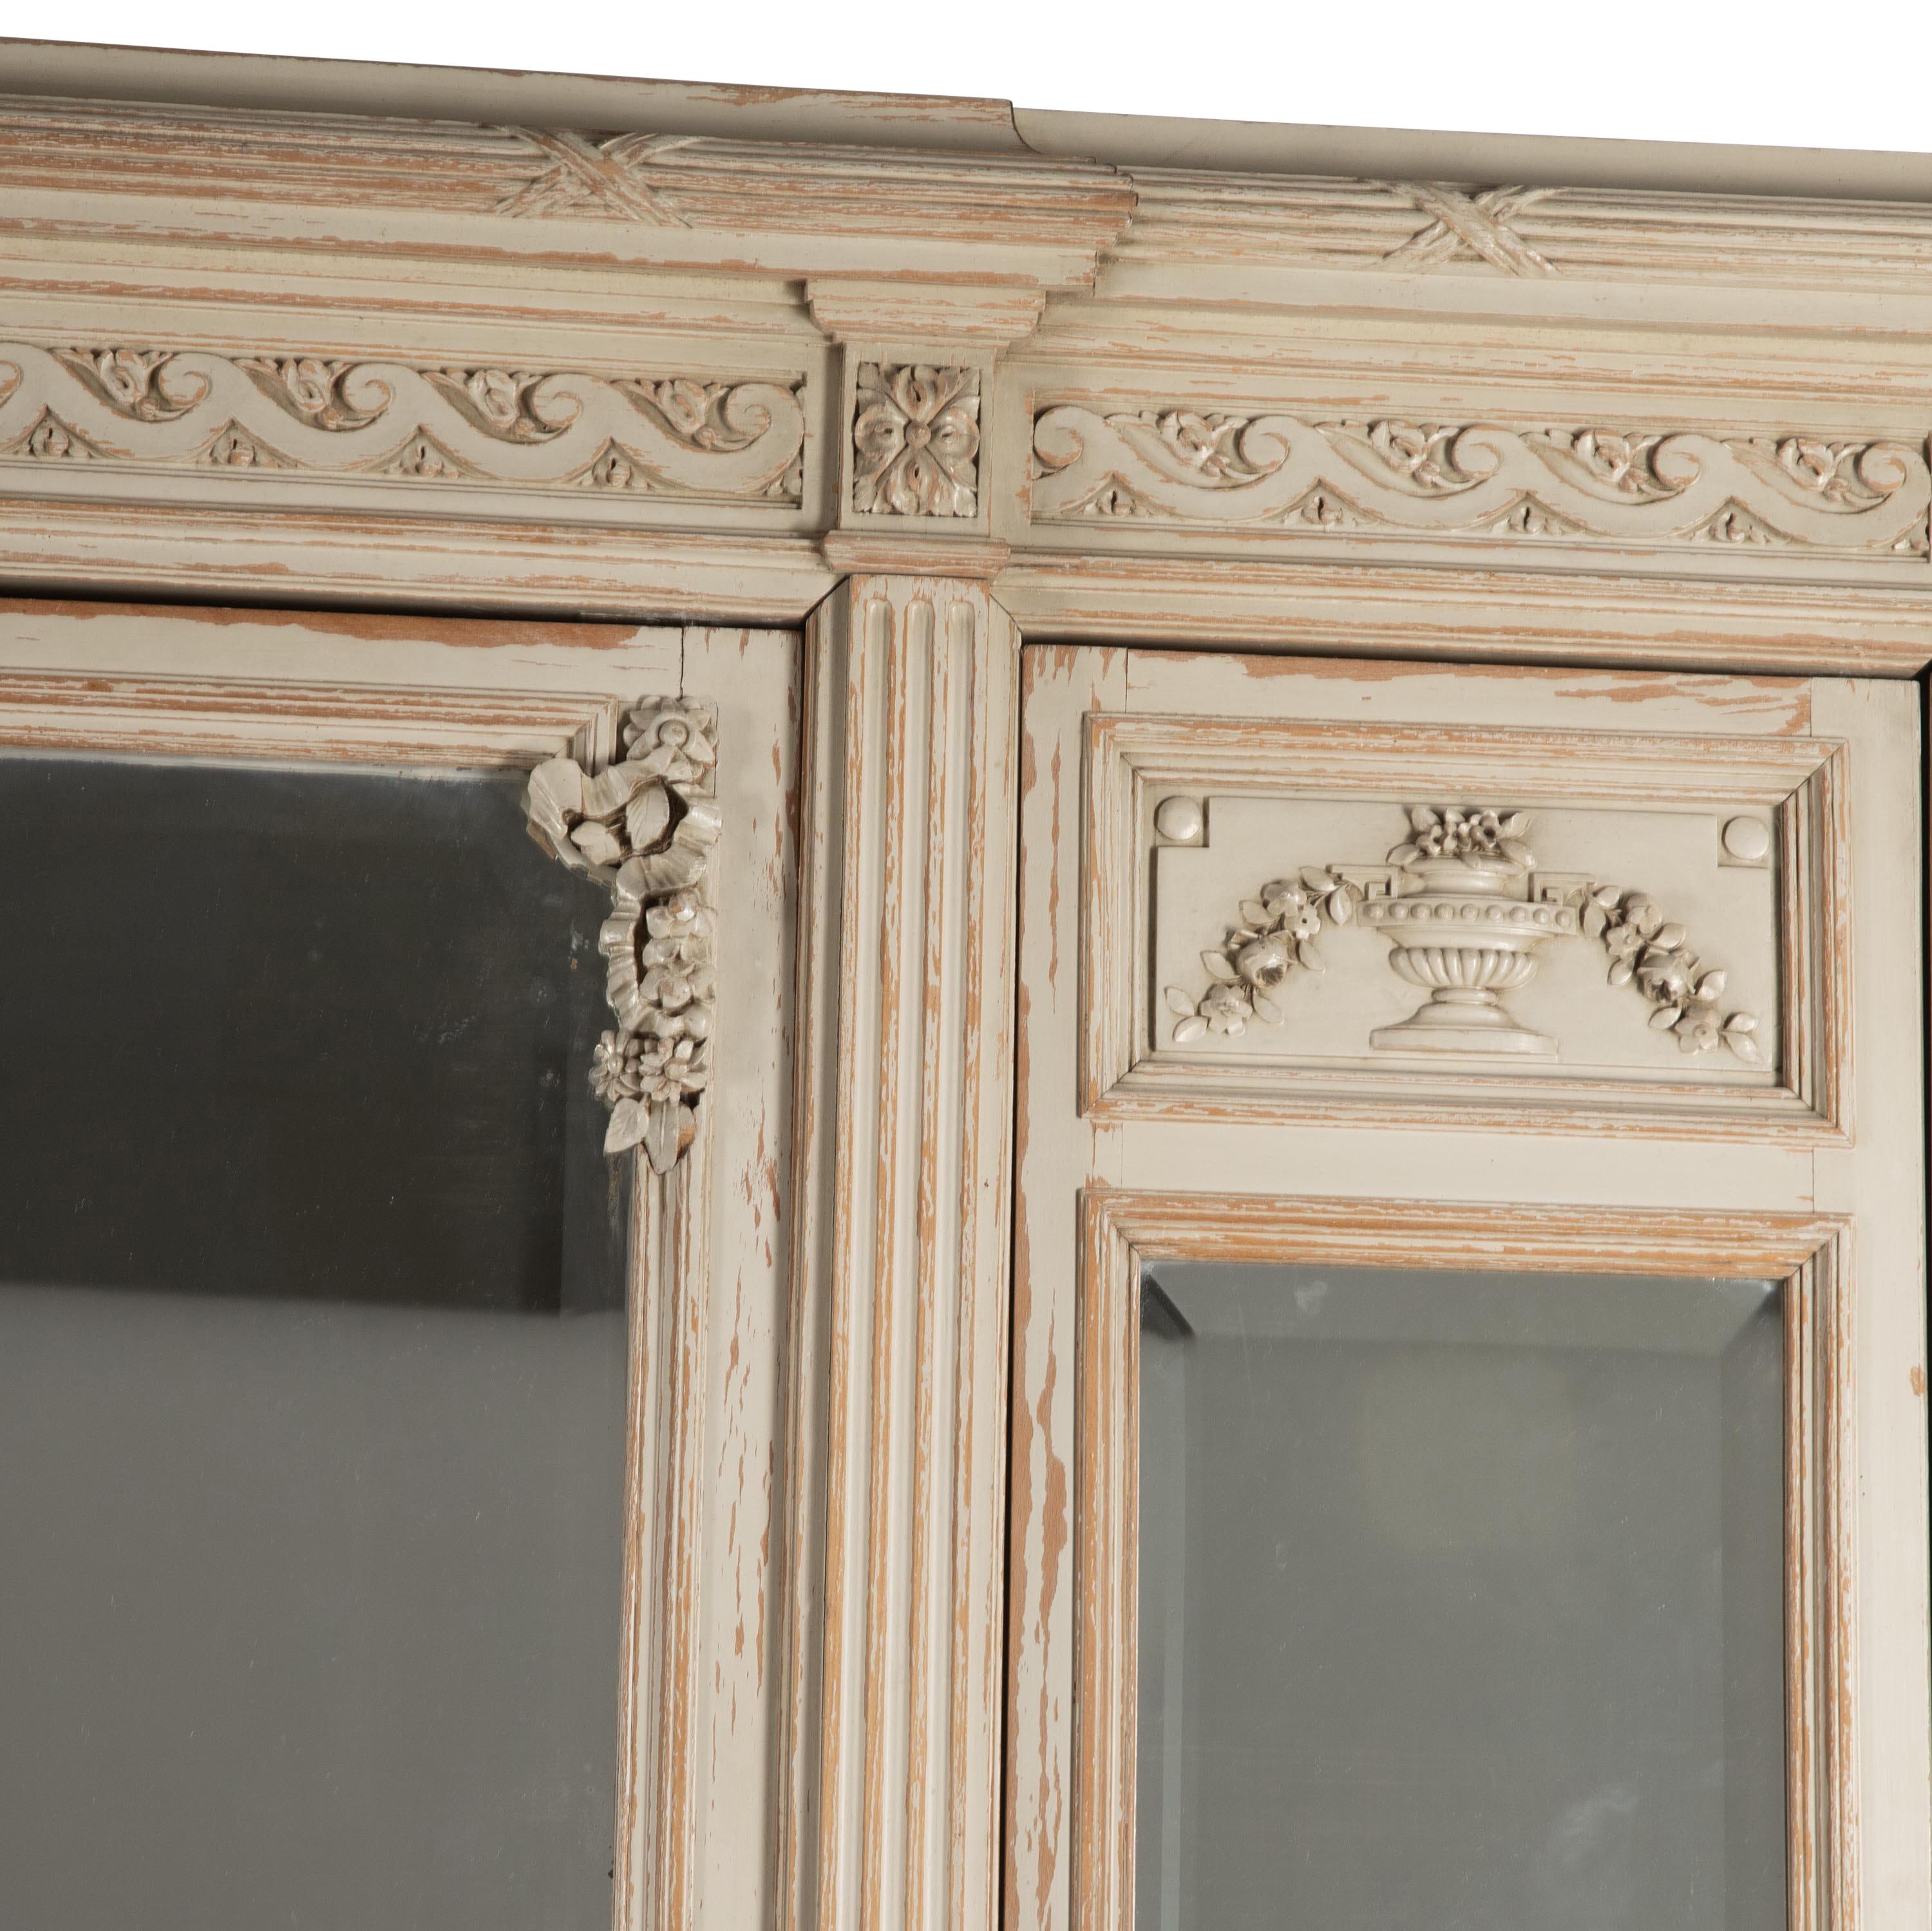 19th Century French armoire in Louis XVI style.
With decorative carved pediment, two narrow side doors with bevelled mirrored glass opening to shelving.
A further larger bevelled edge mirrored door in the centre opening to hanging space.
Decorated